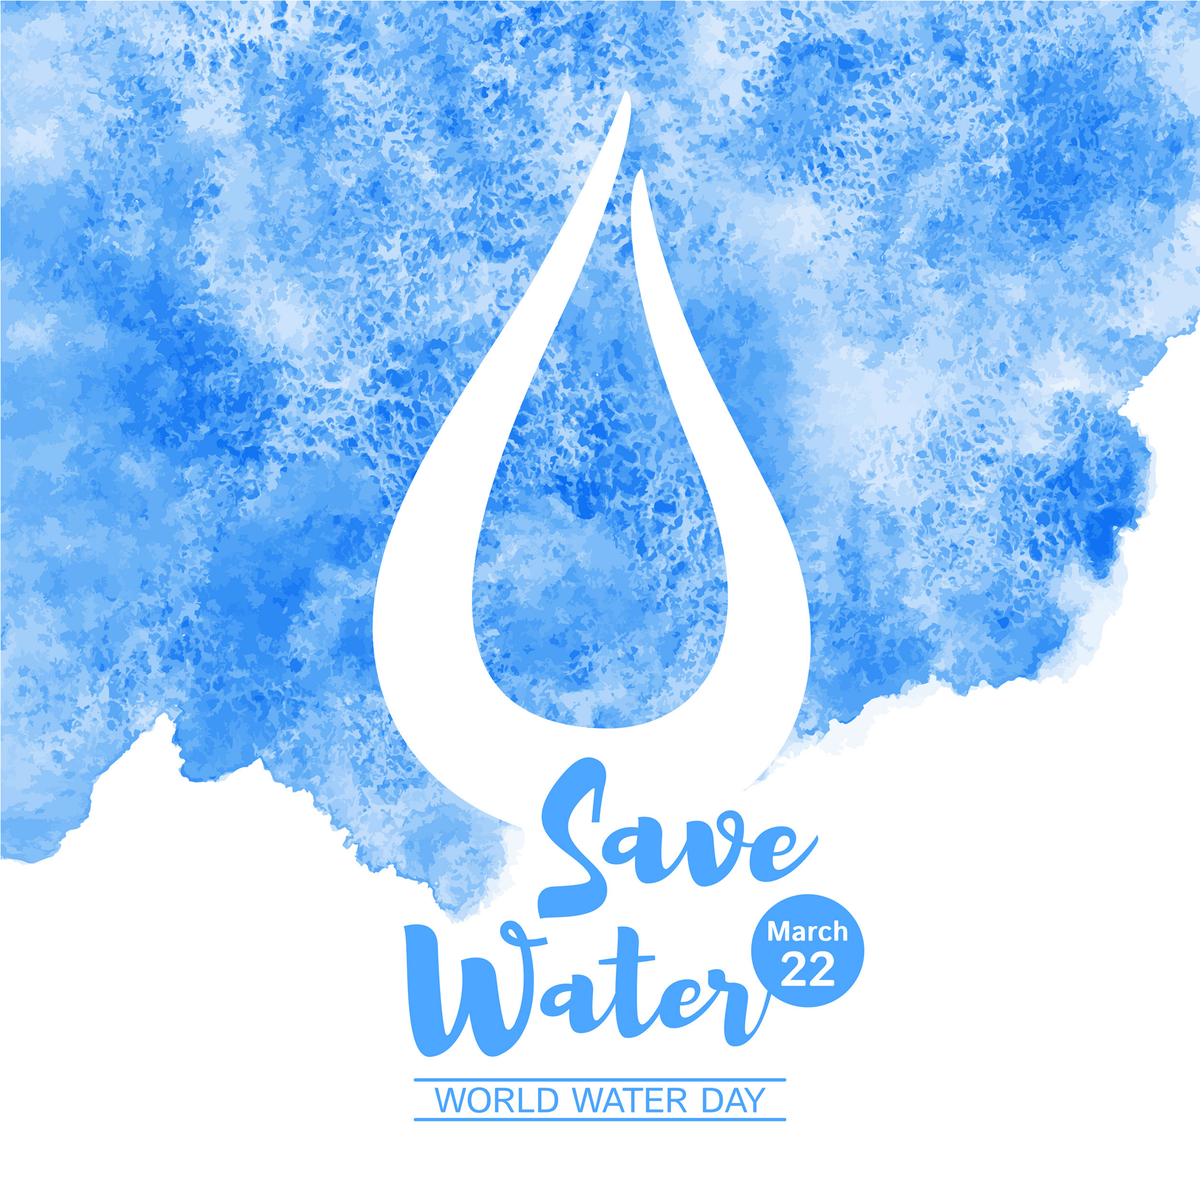 10 World Water Day 2017 Images to Bring Attention to the Crisis